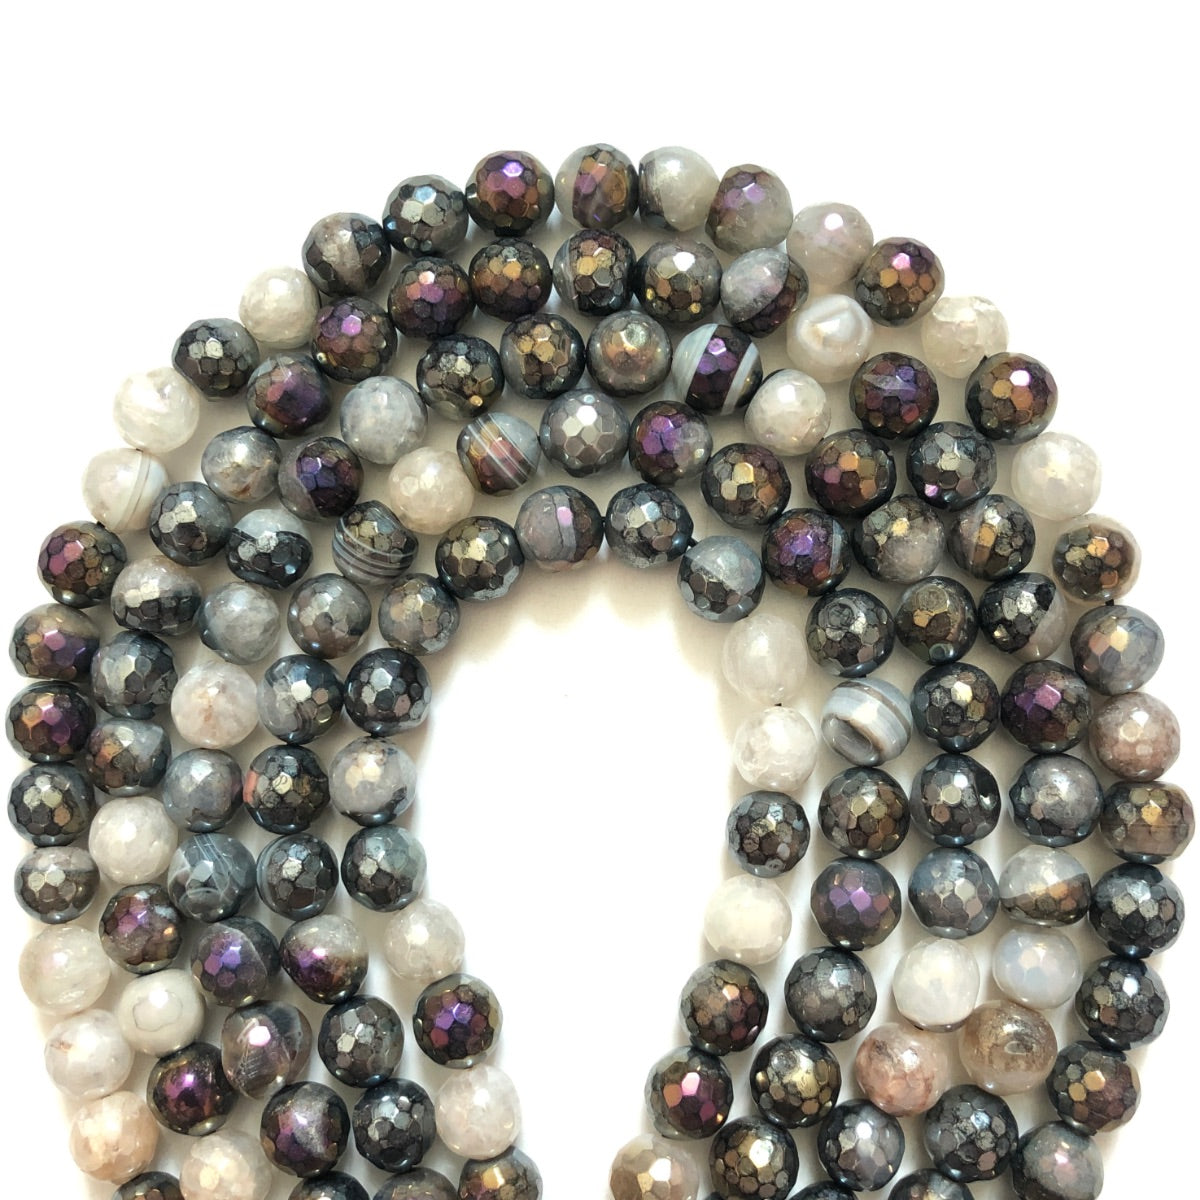 2 Strands/lot 10mm Electroplated AB Black White Banded Agate Faceted Stone Beads Electroplated Beads Electroplated Faceted Agate Beads New Beads Arrivals Charms Beads Beyond